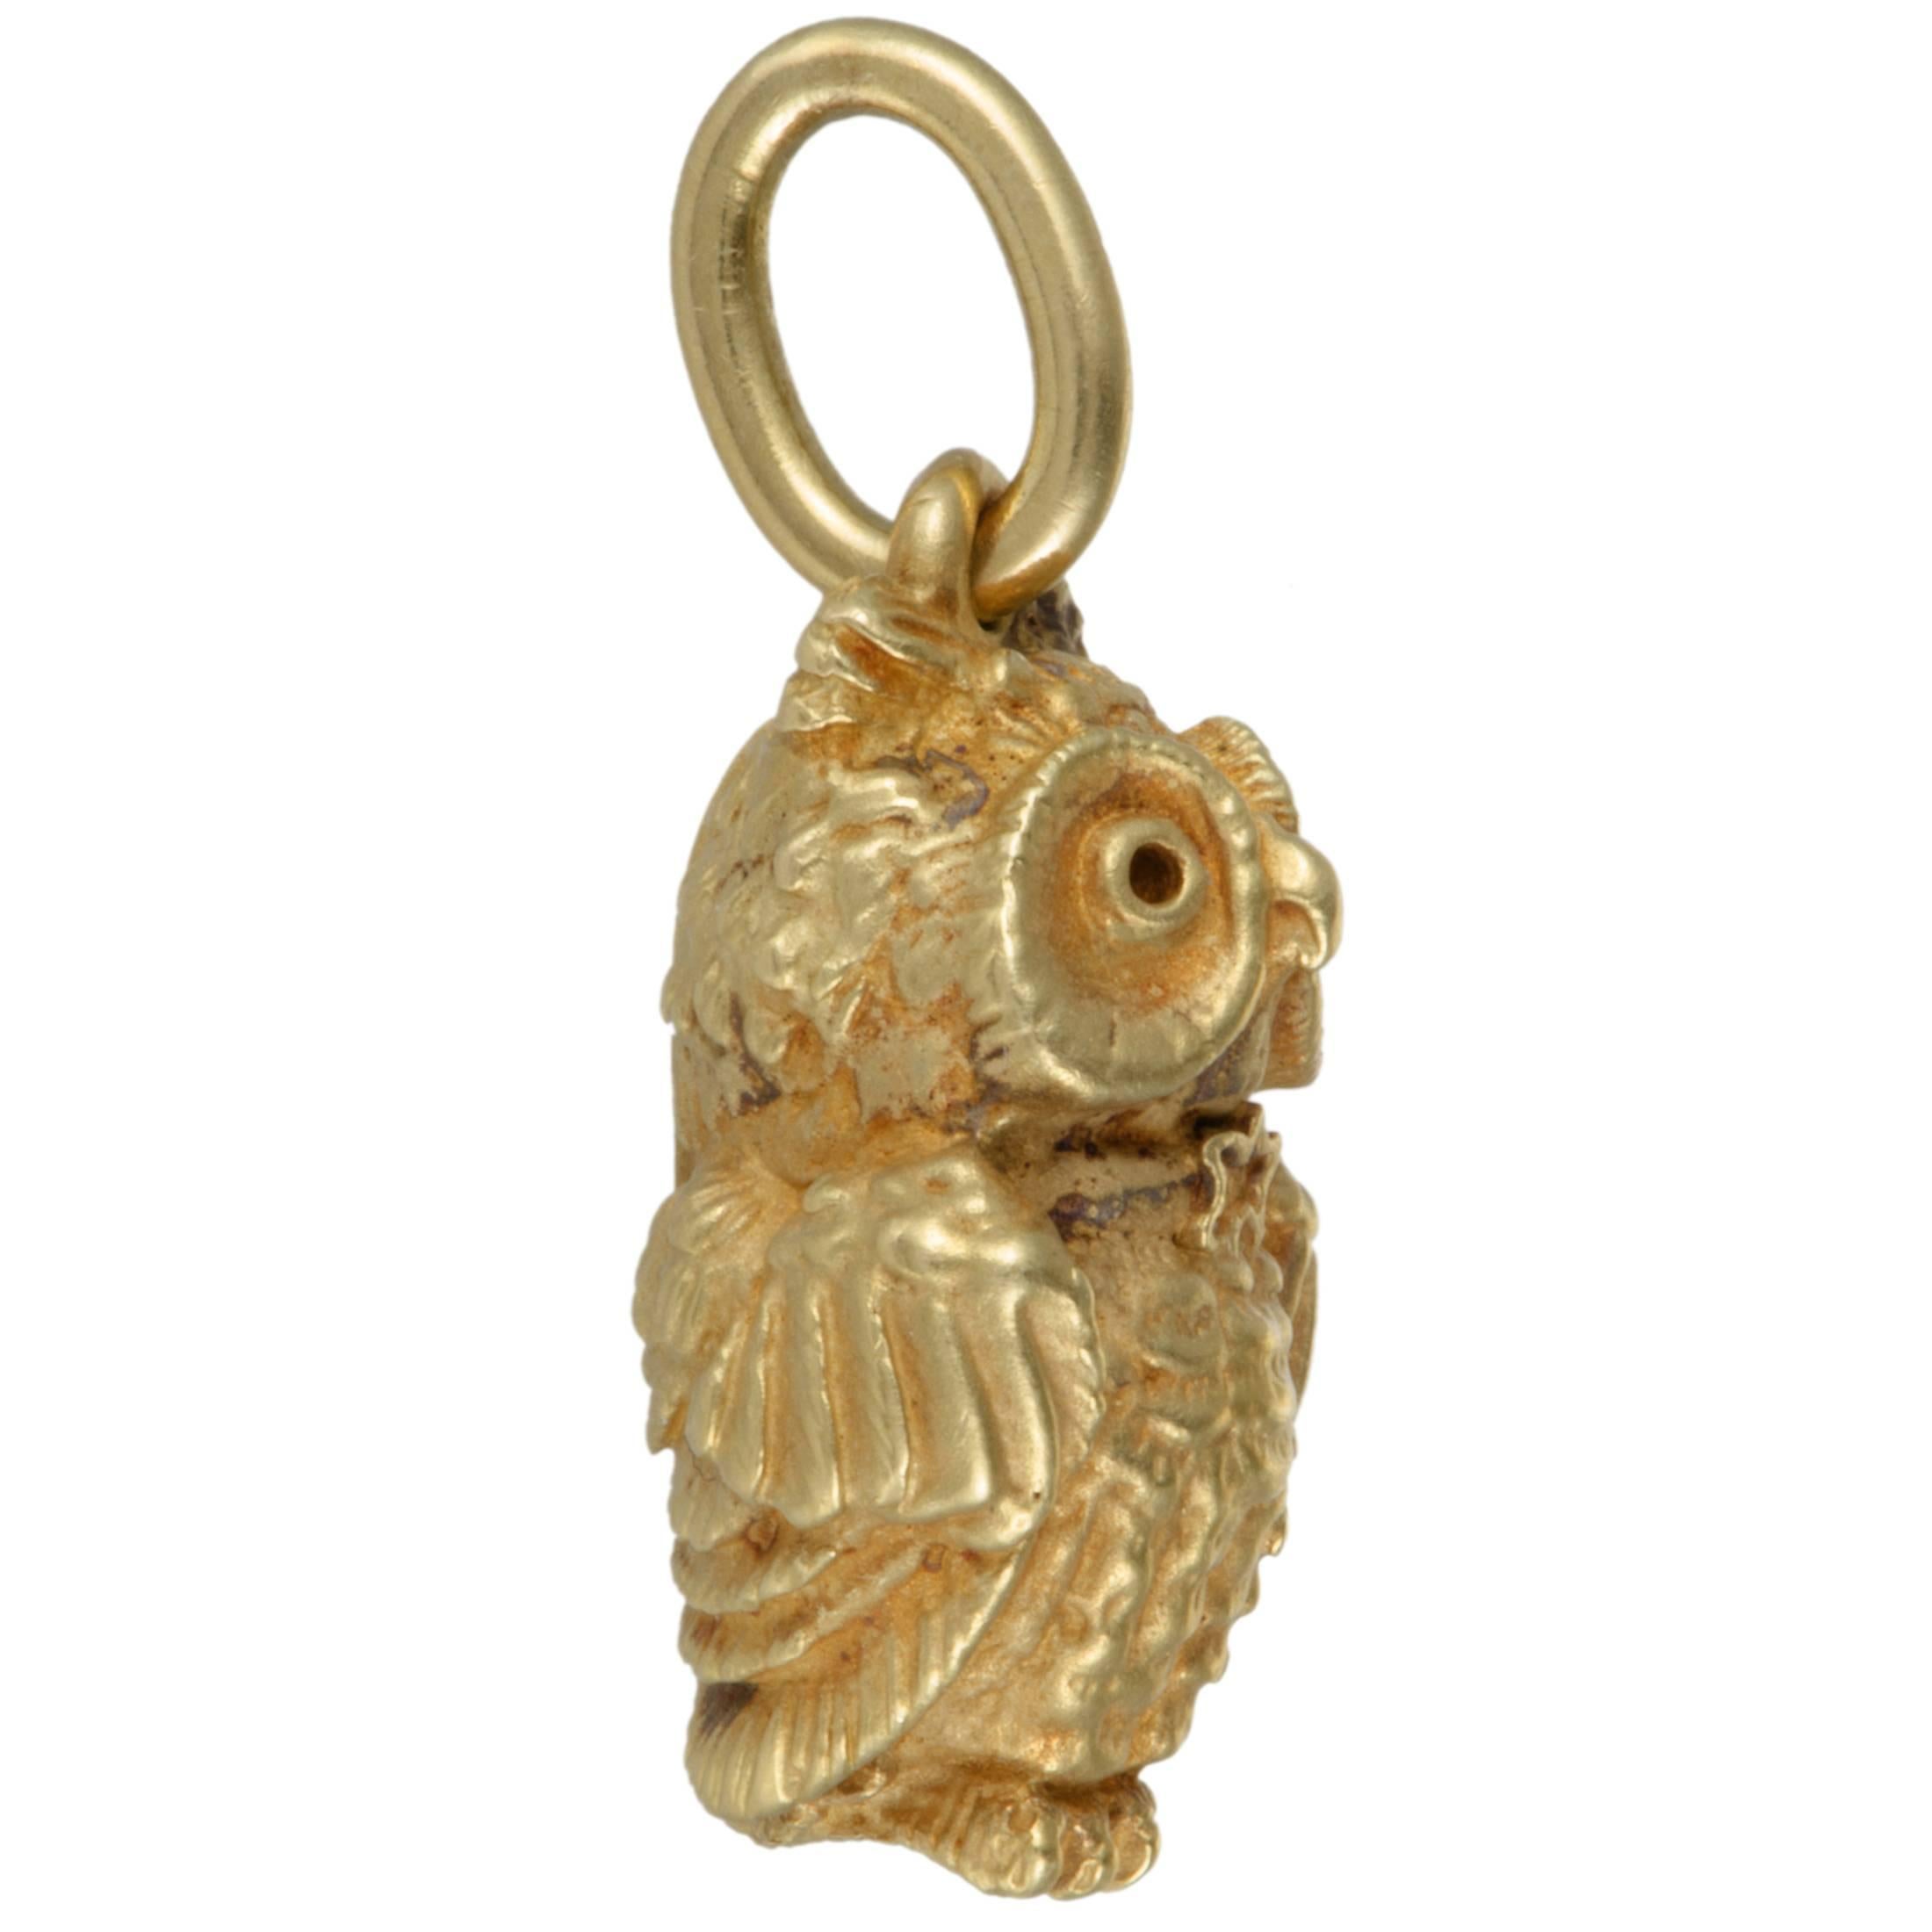 This fascinating owl pendant is incredibly designed by Keiselstein-Cord. The remarkable pendant glistens in the beautiful shimmer of 18K gold and is a fashionable item to add to your collection.
